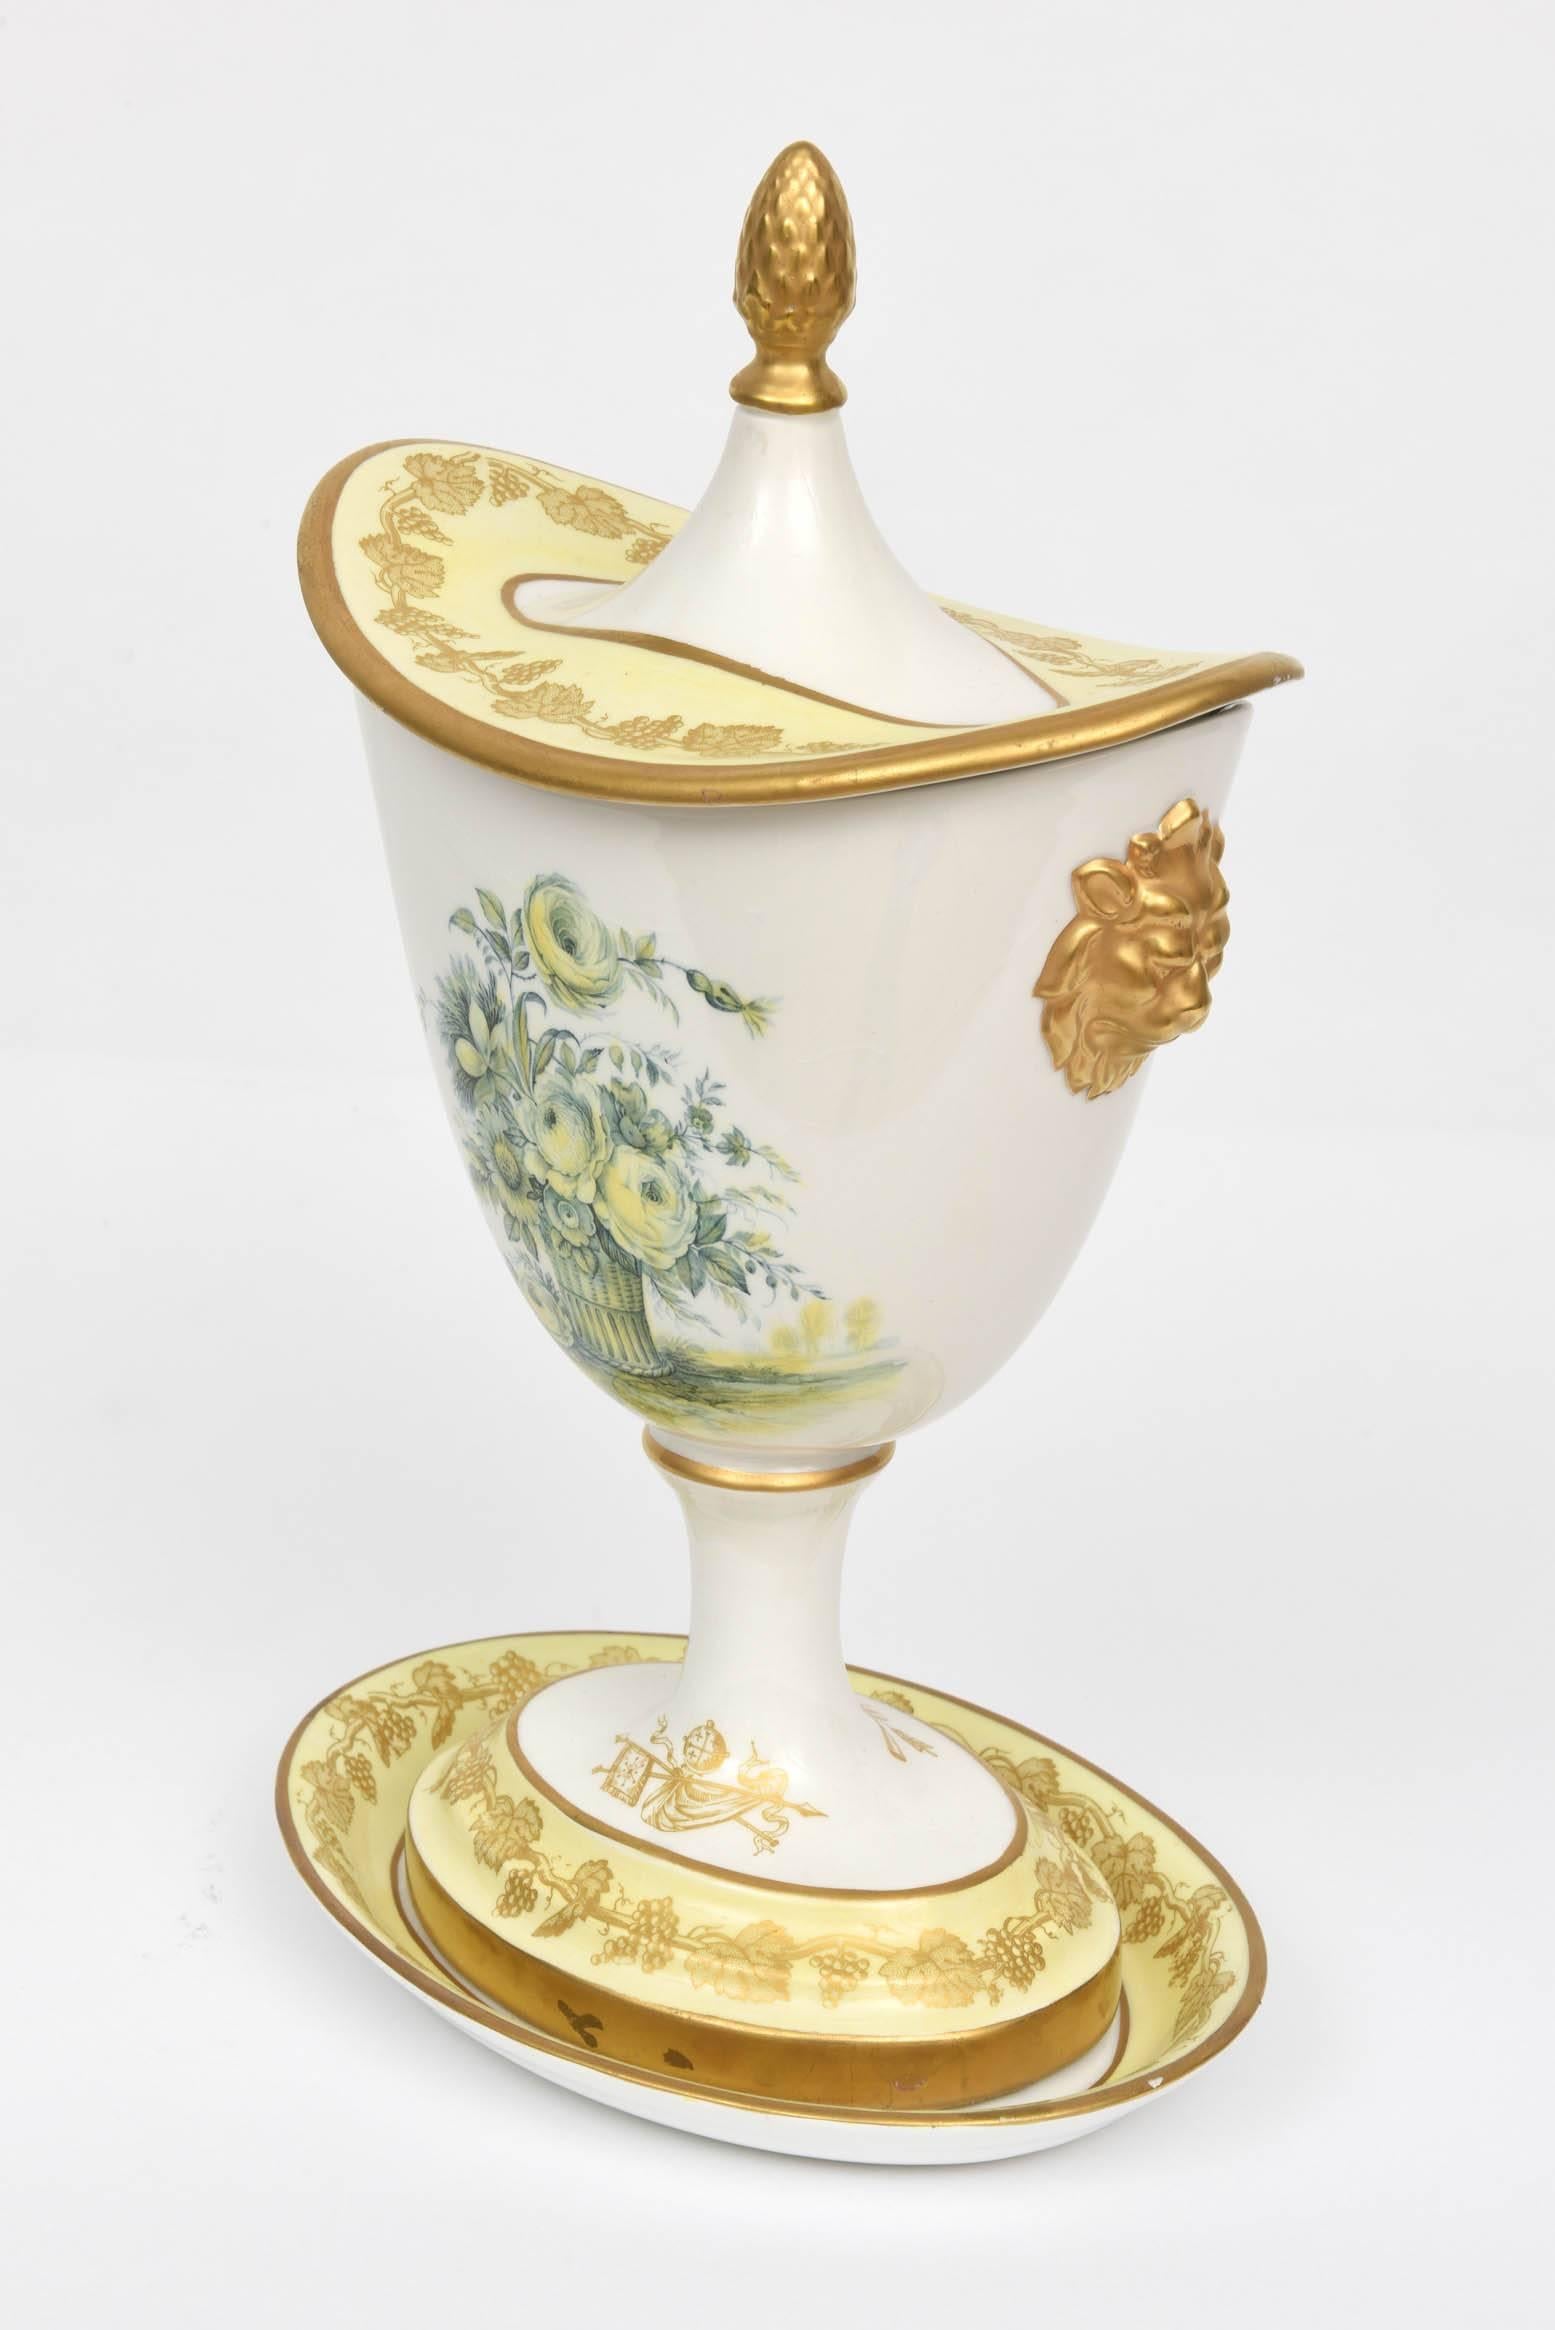 An interesting three part vase set featuring a fitted oval cover, pedestal base and under tray. Nice detailing from Mottadeh whose realistic depictions of antique patterns are world re known. Please see the other coordinating pieces. Very nice